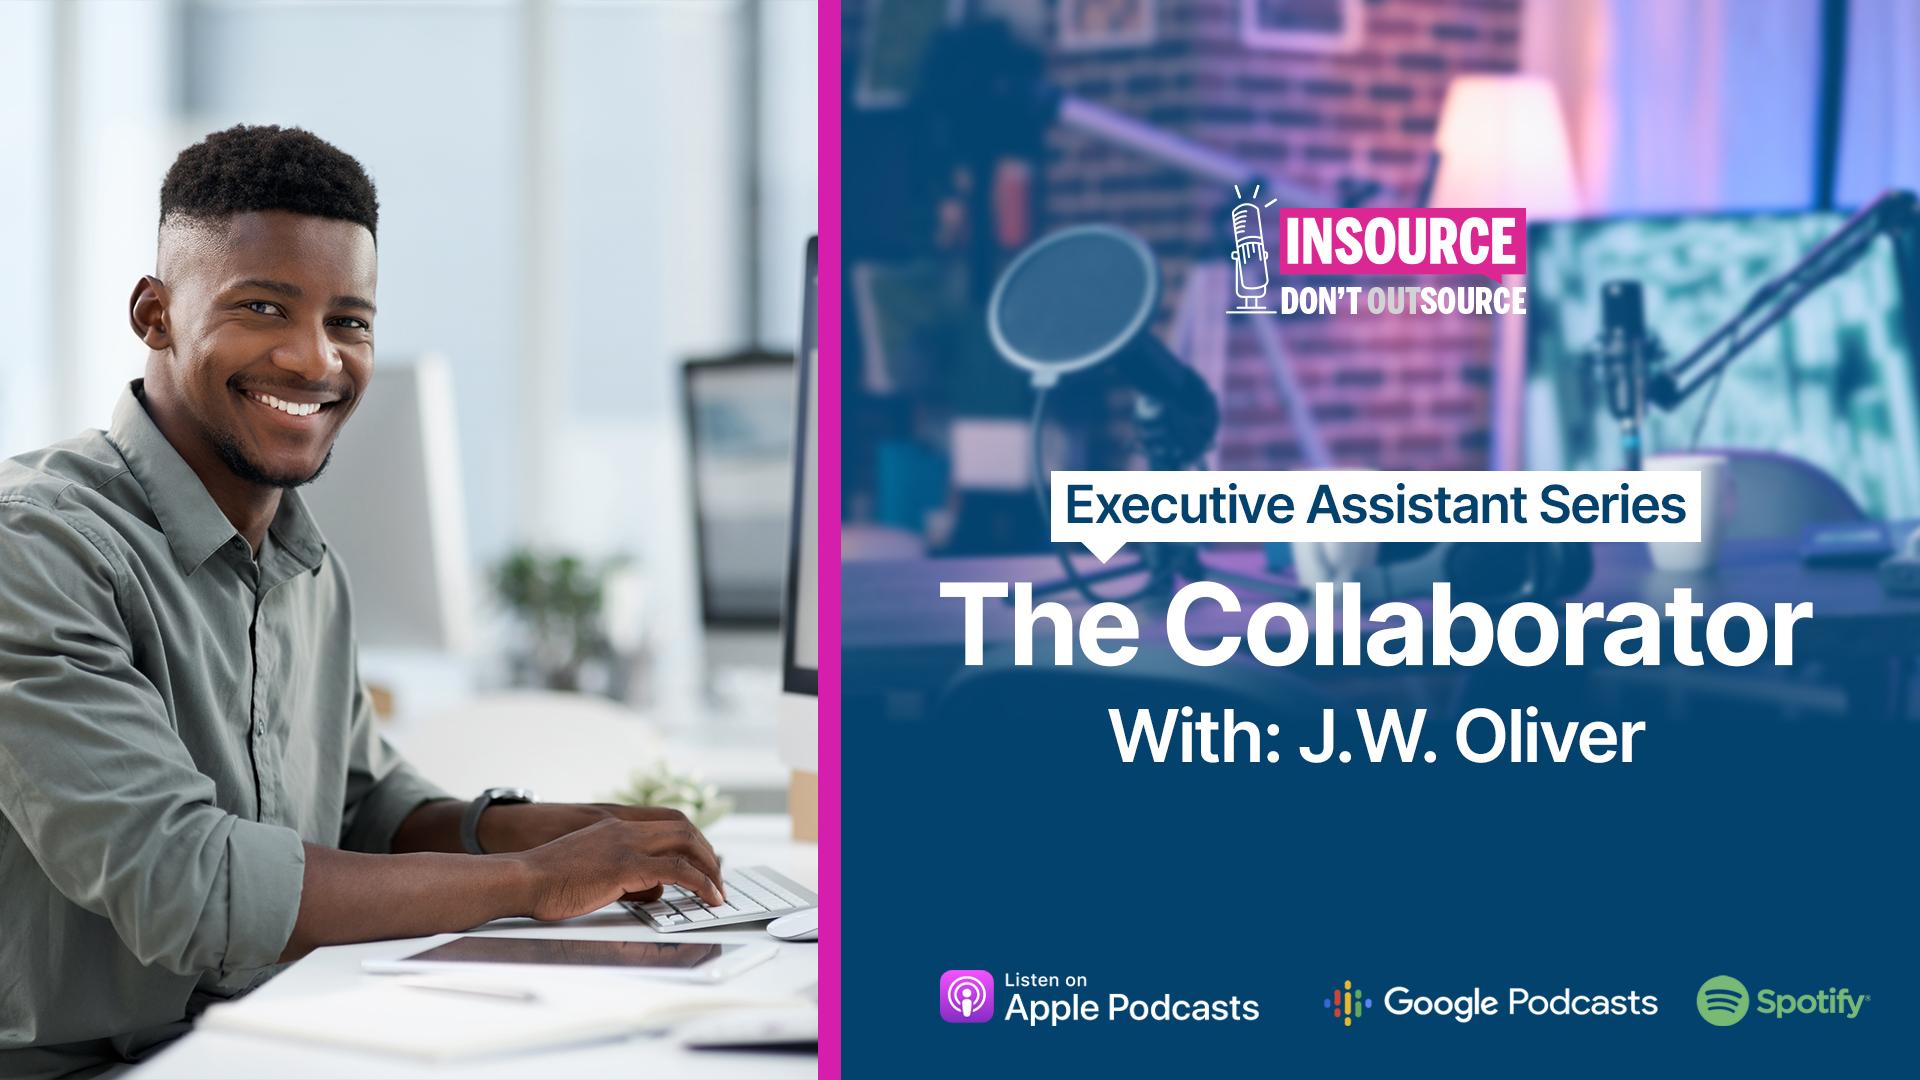 Episode 40 | Executive Assistant Series - The Collaborator